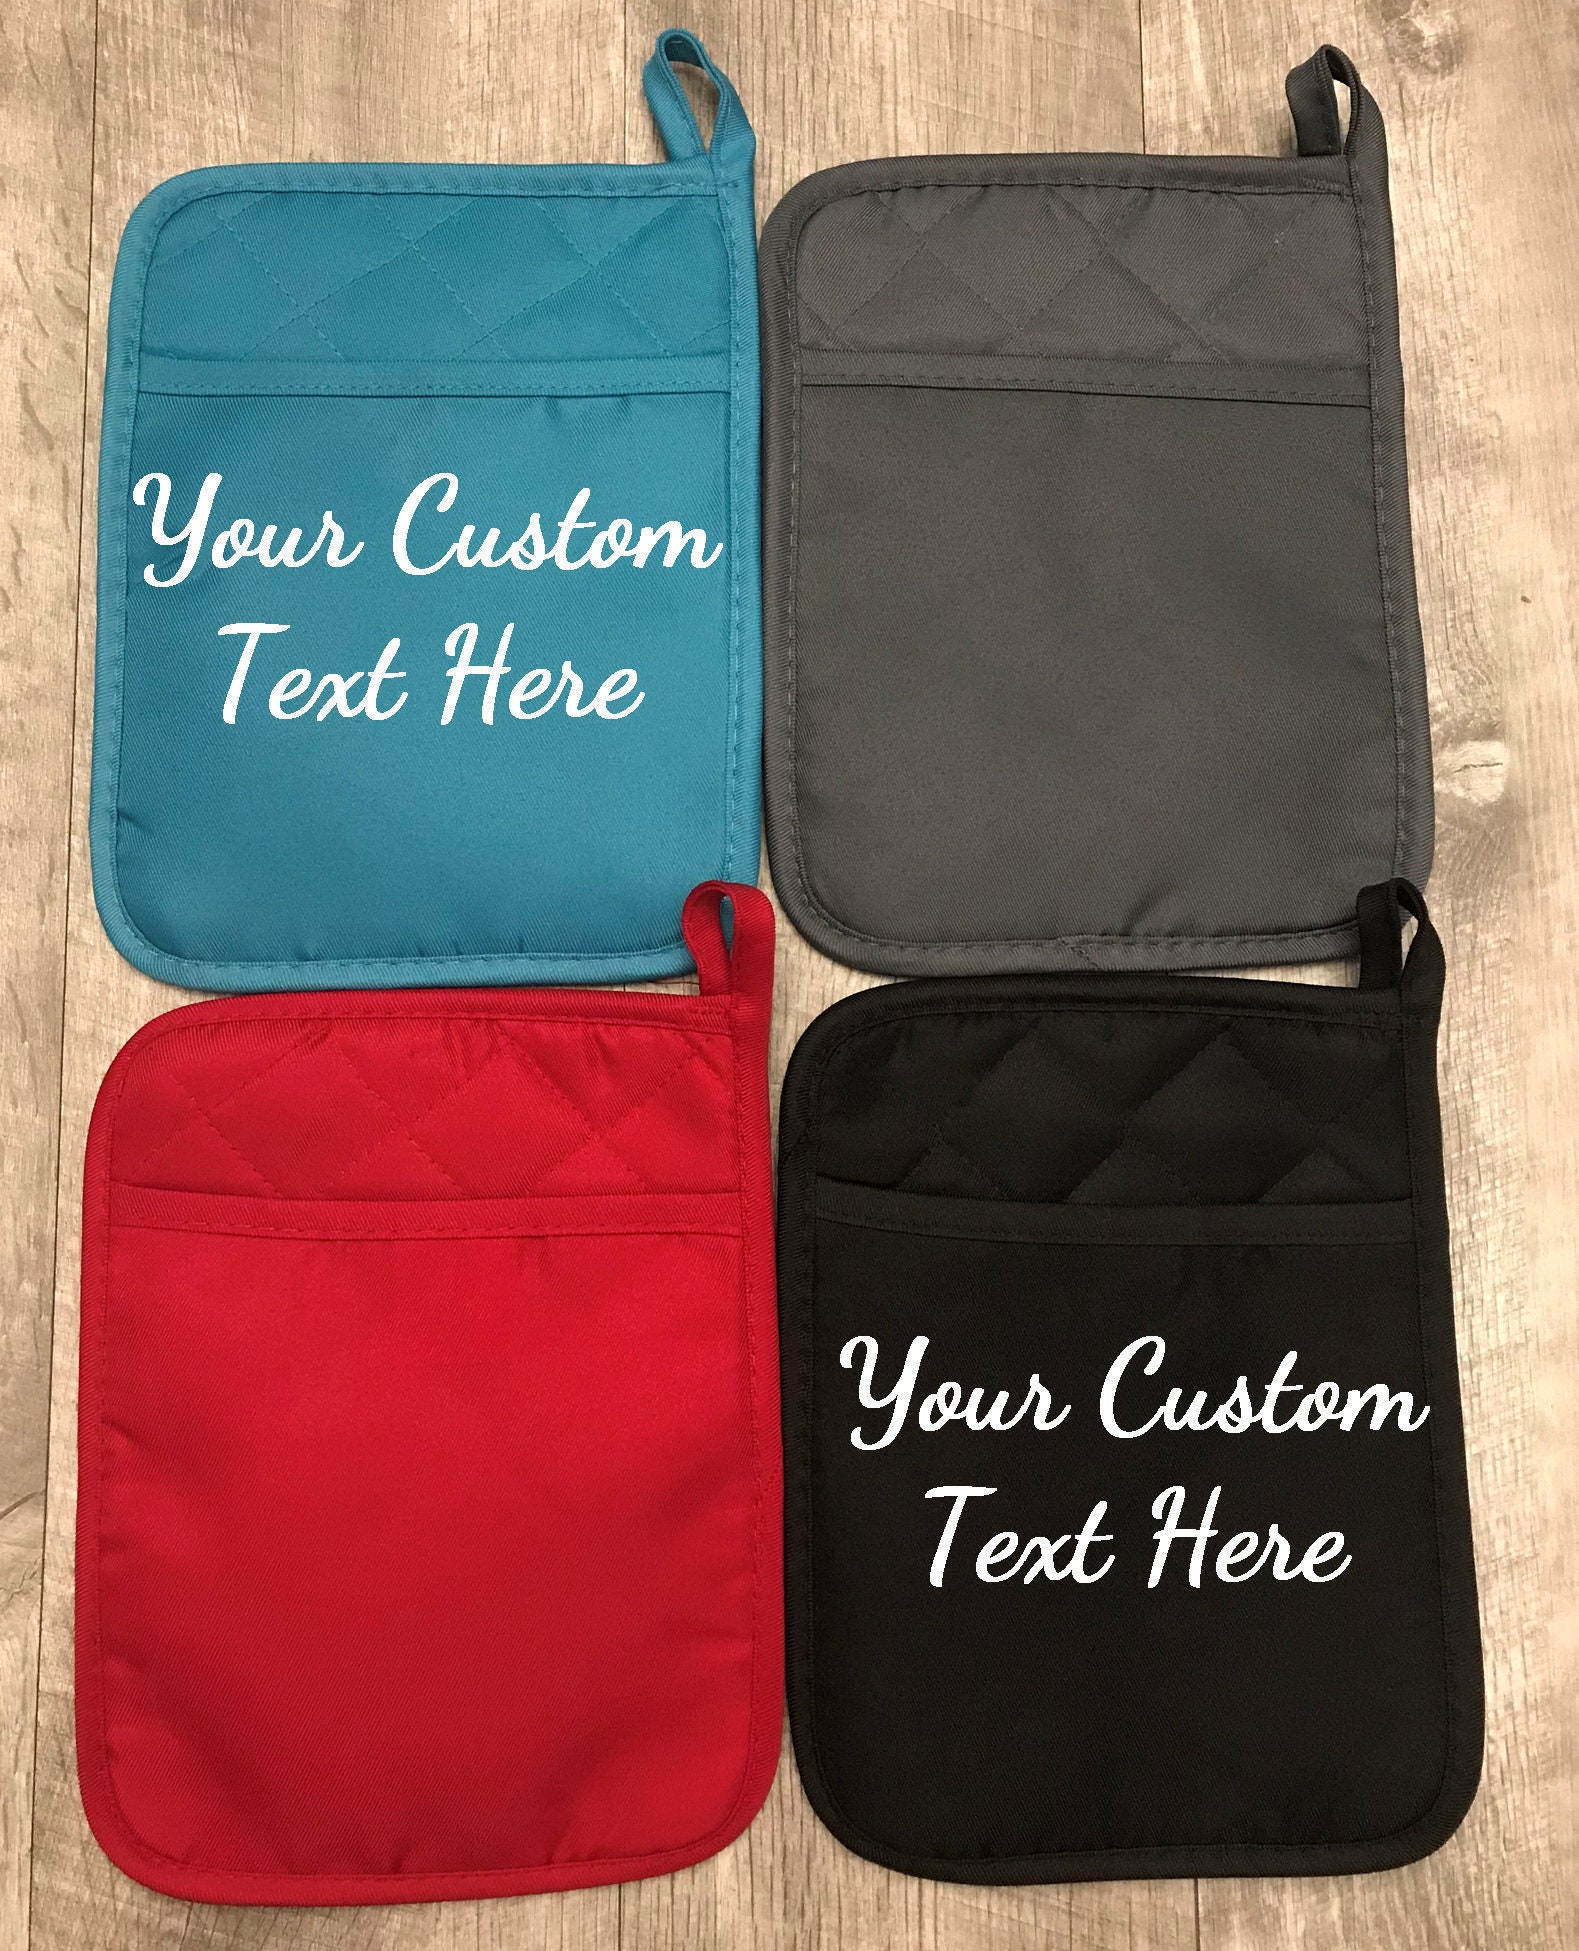 Fun Personalized Oven Mitts — Cute Oven Mitts and Pot Holders